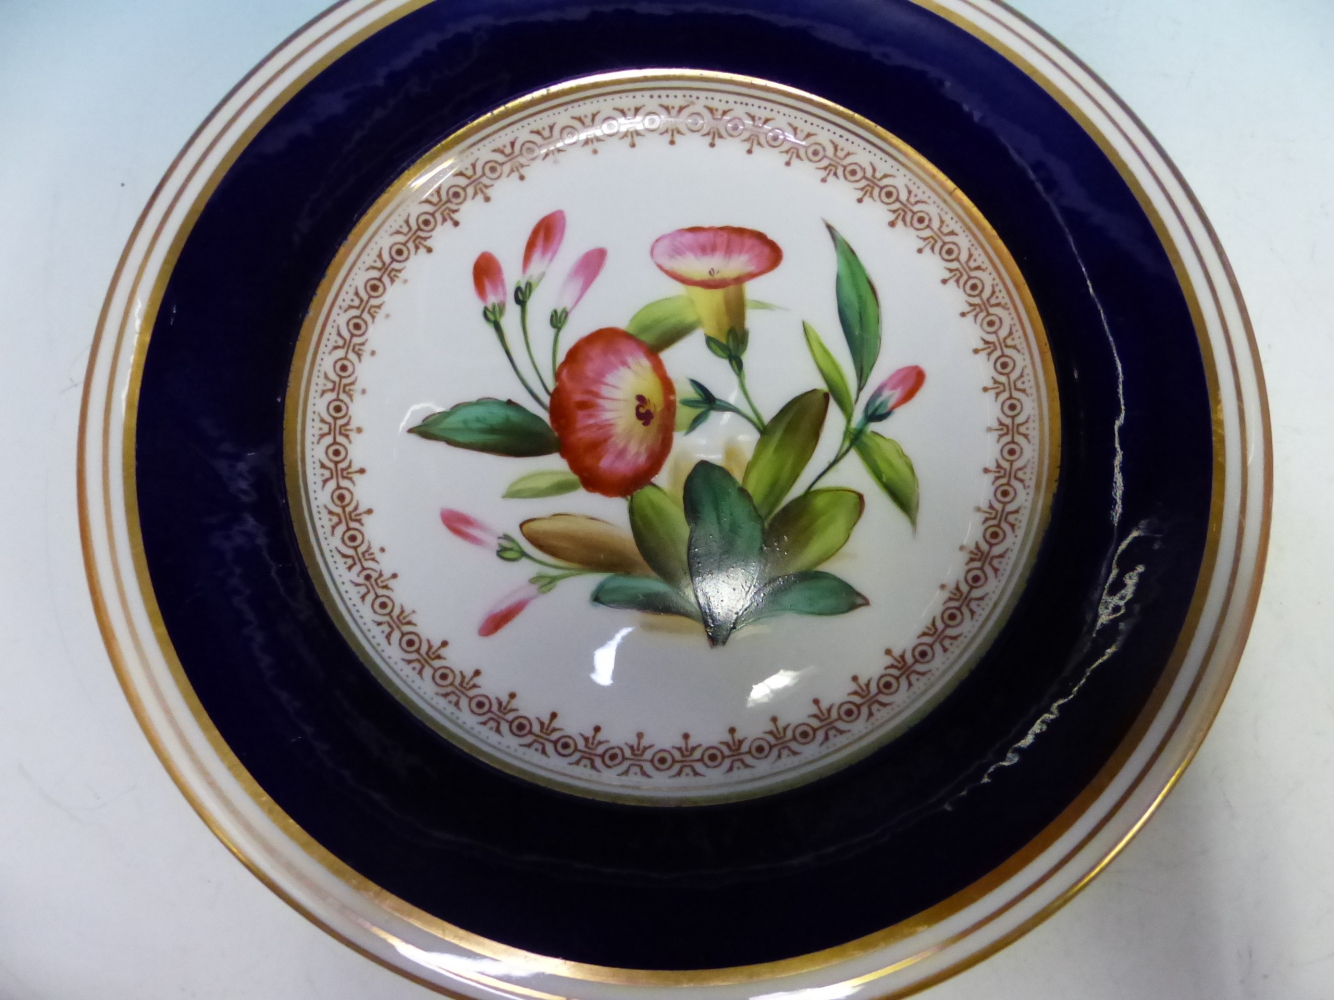 A LATE 19th C. ENGLISH PORCELAIN DESSERT SERVICE, EACH PIECE PRINTED AND PAINTED WITH FLOWERS WITHIN - Image 15 of 18